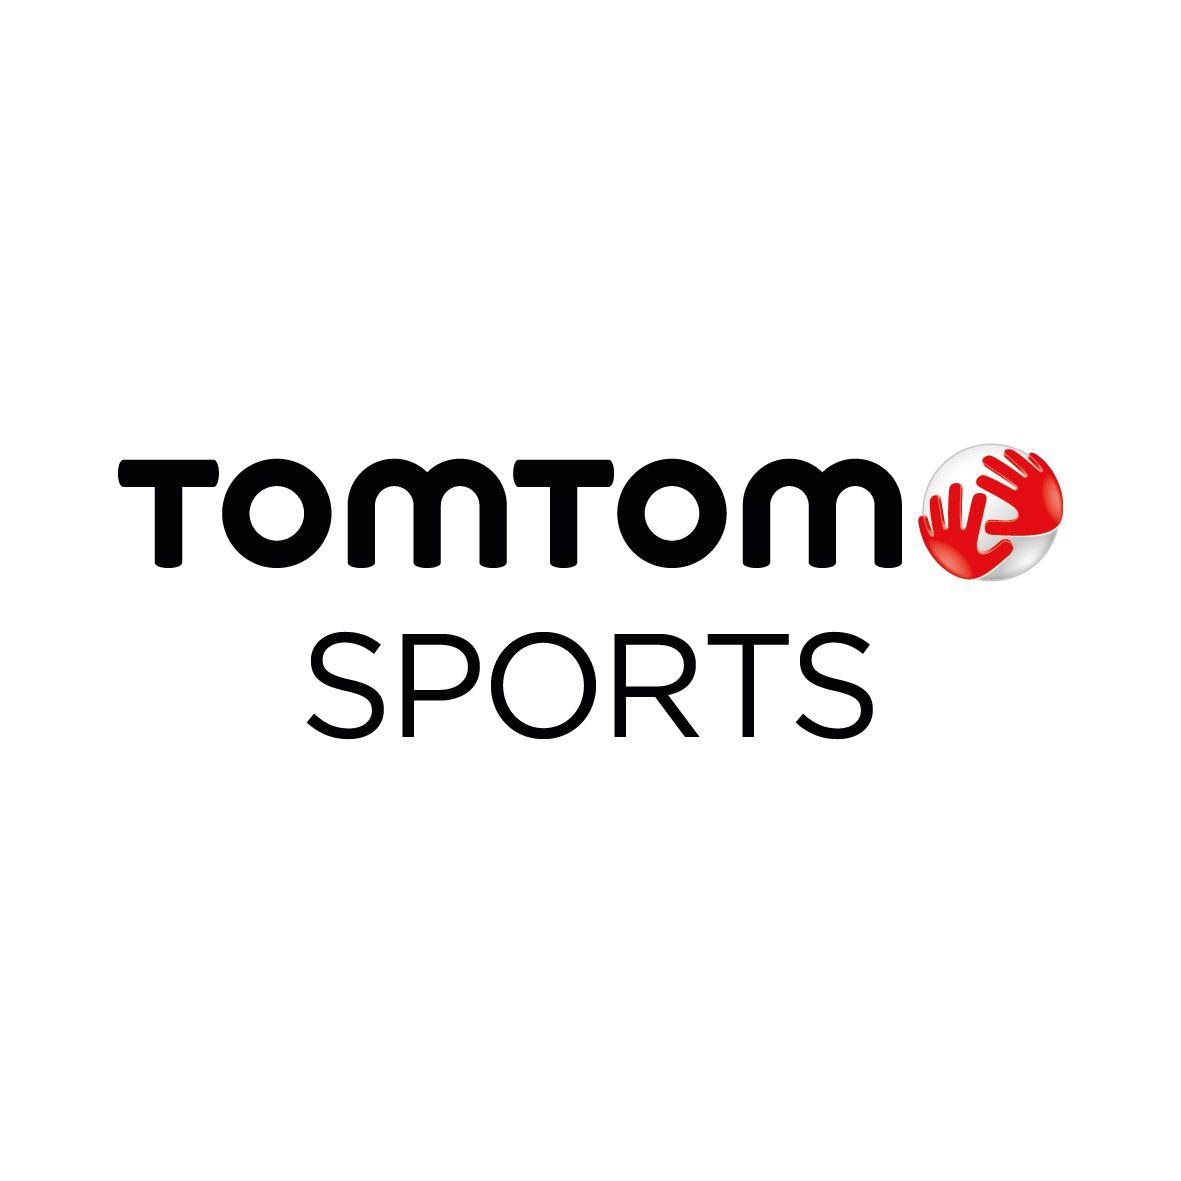 TomTom Logo - TomTom Sports and EuropeActive Join Forces - EuropeActive